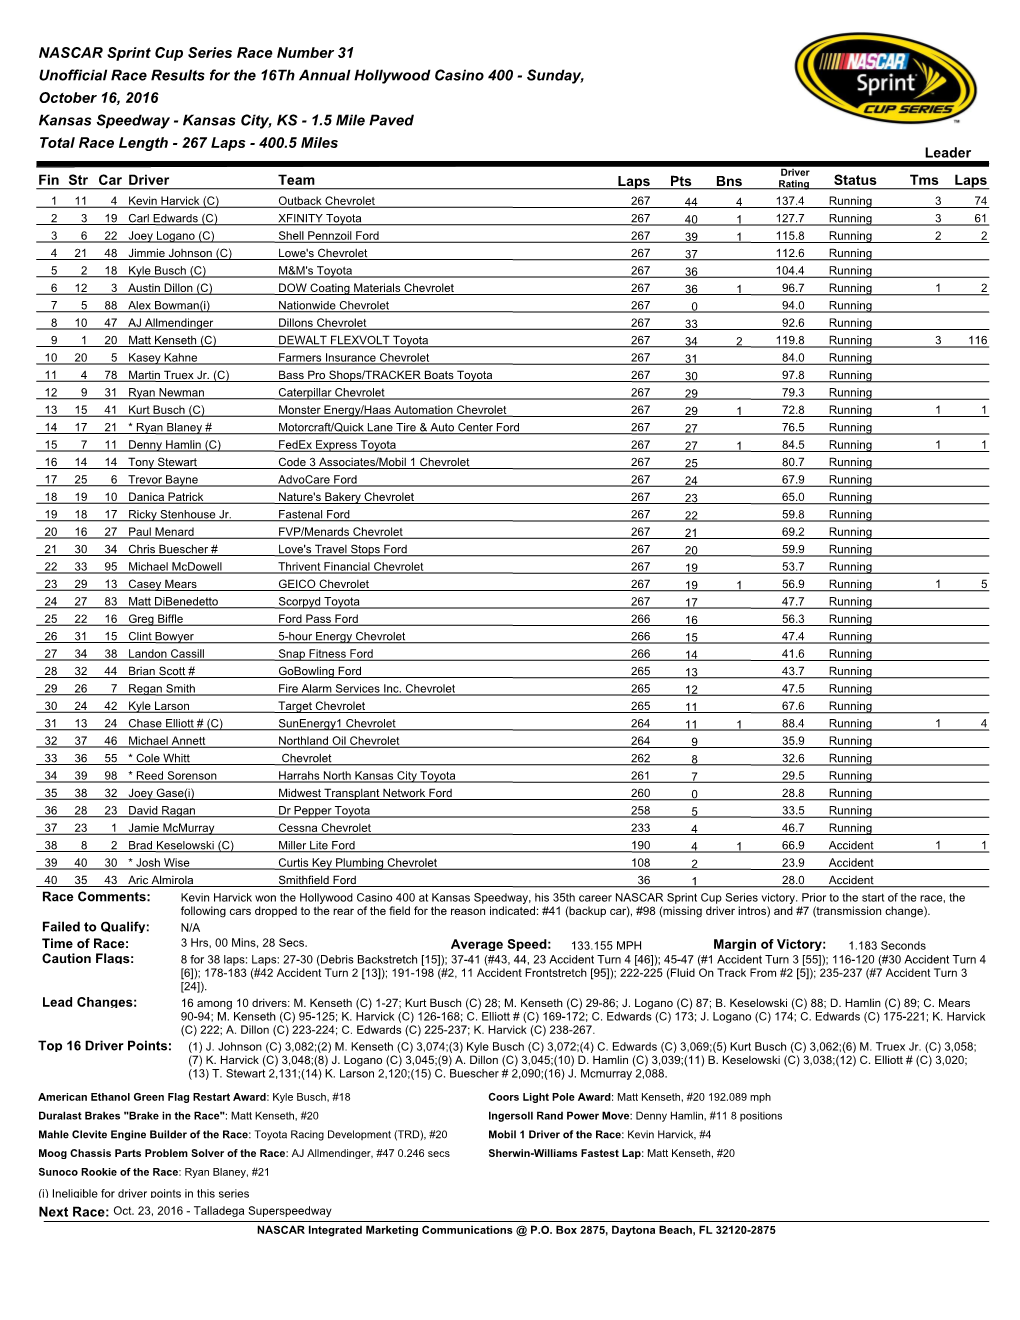 NASCAR Sprint Cup Series Race Number 31 Unofficial Race Results